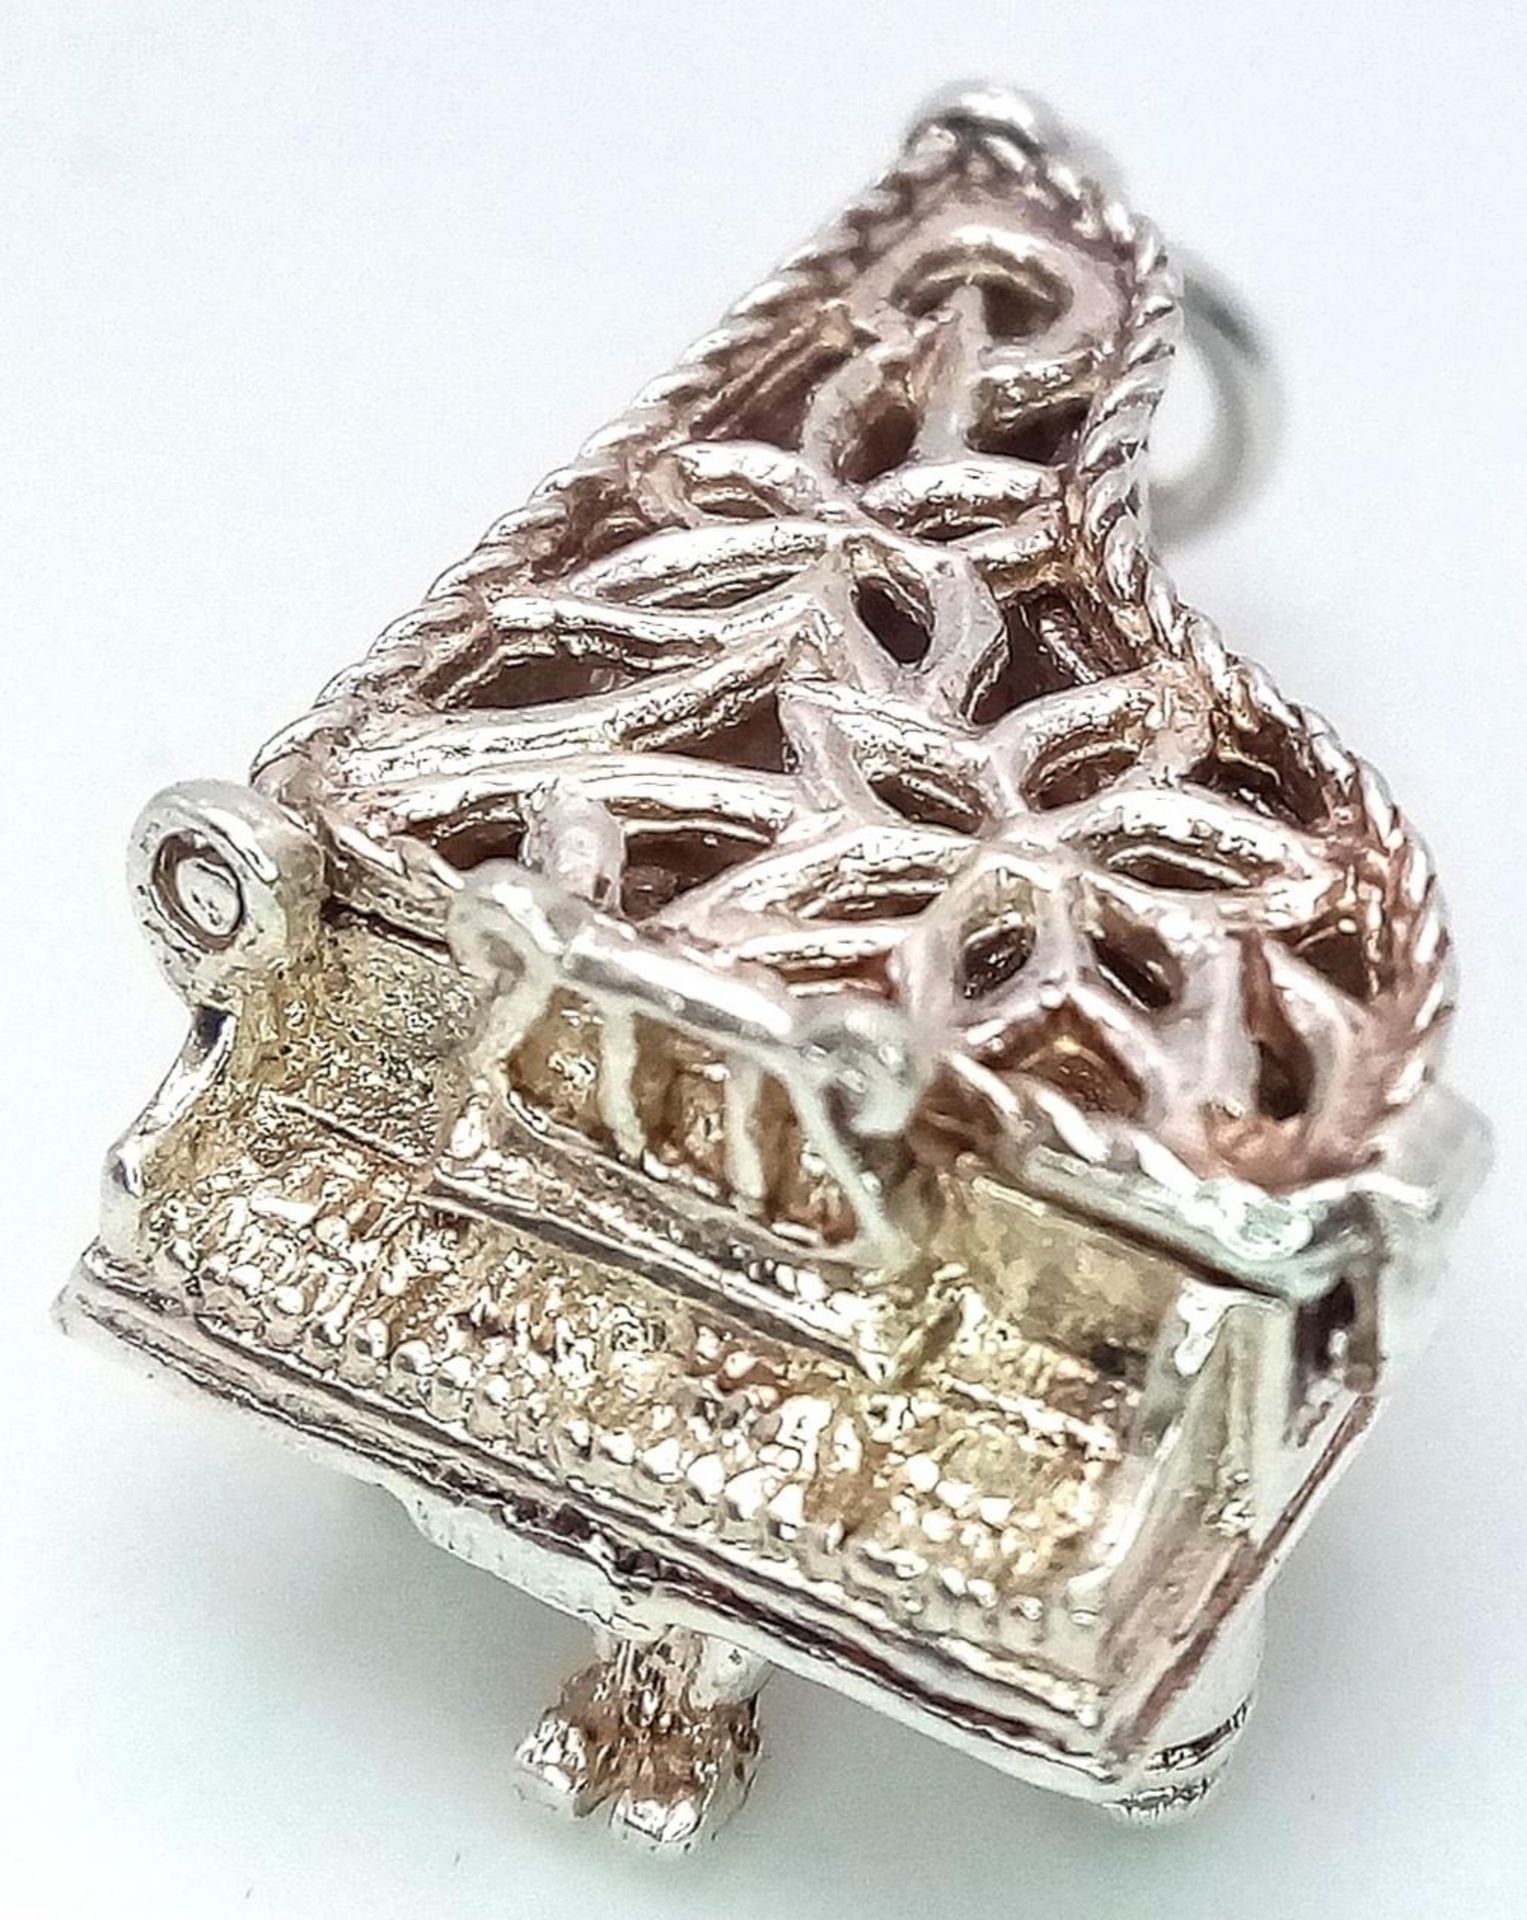 A Sterling Silver Piano Charm. Opens to reveal music notes. 2.5cm length, 4.5g weight. Ref: SC 7080